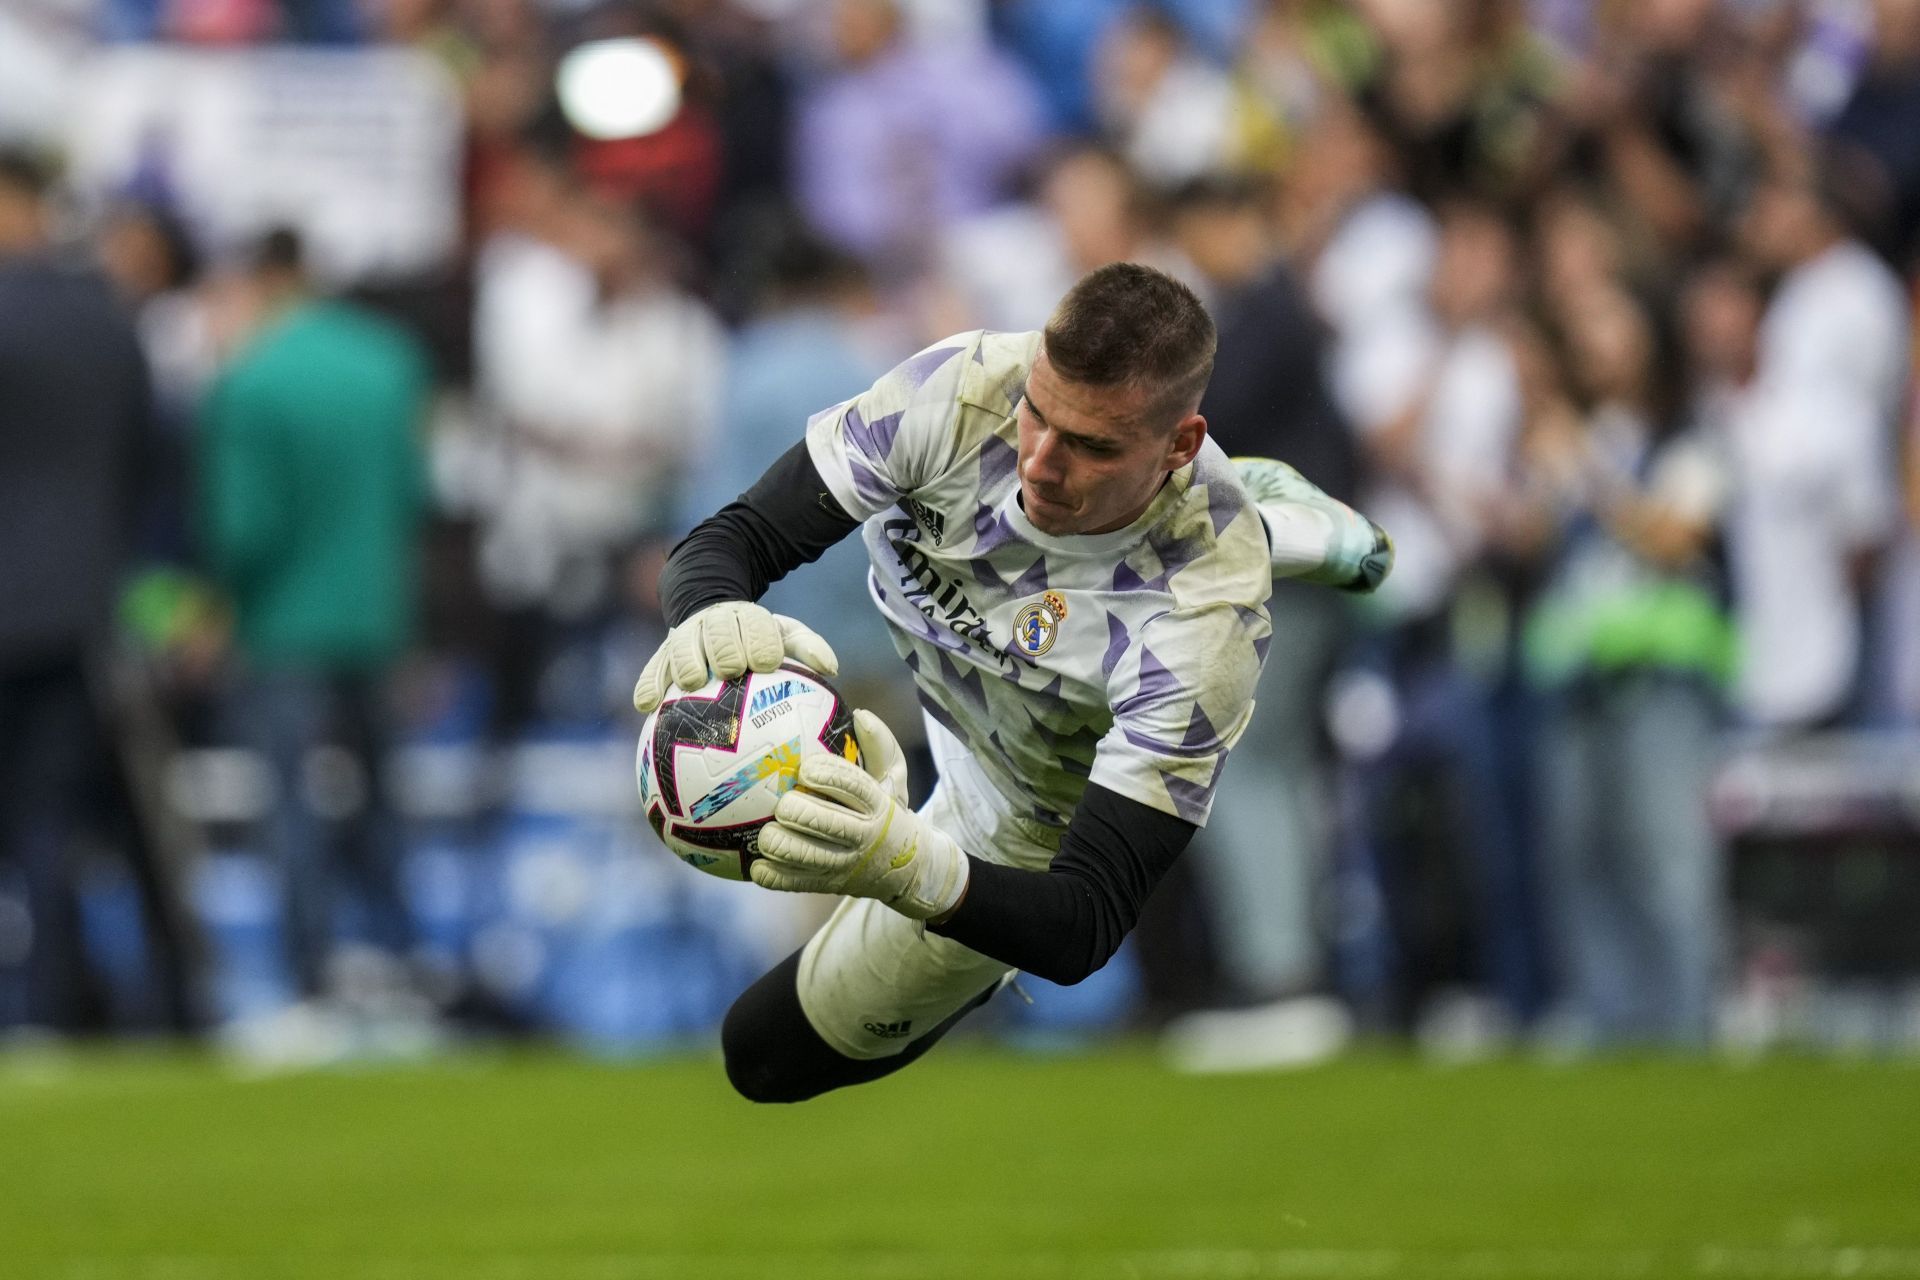 Andriy Lunin is likely to be thrust into action this season.